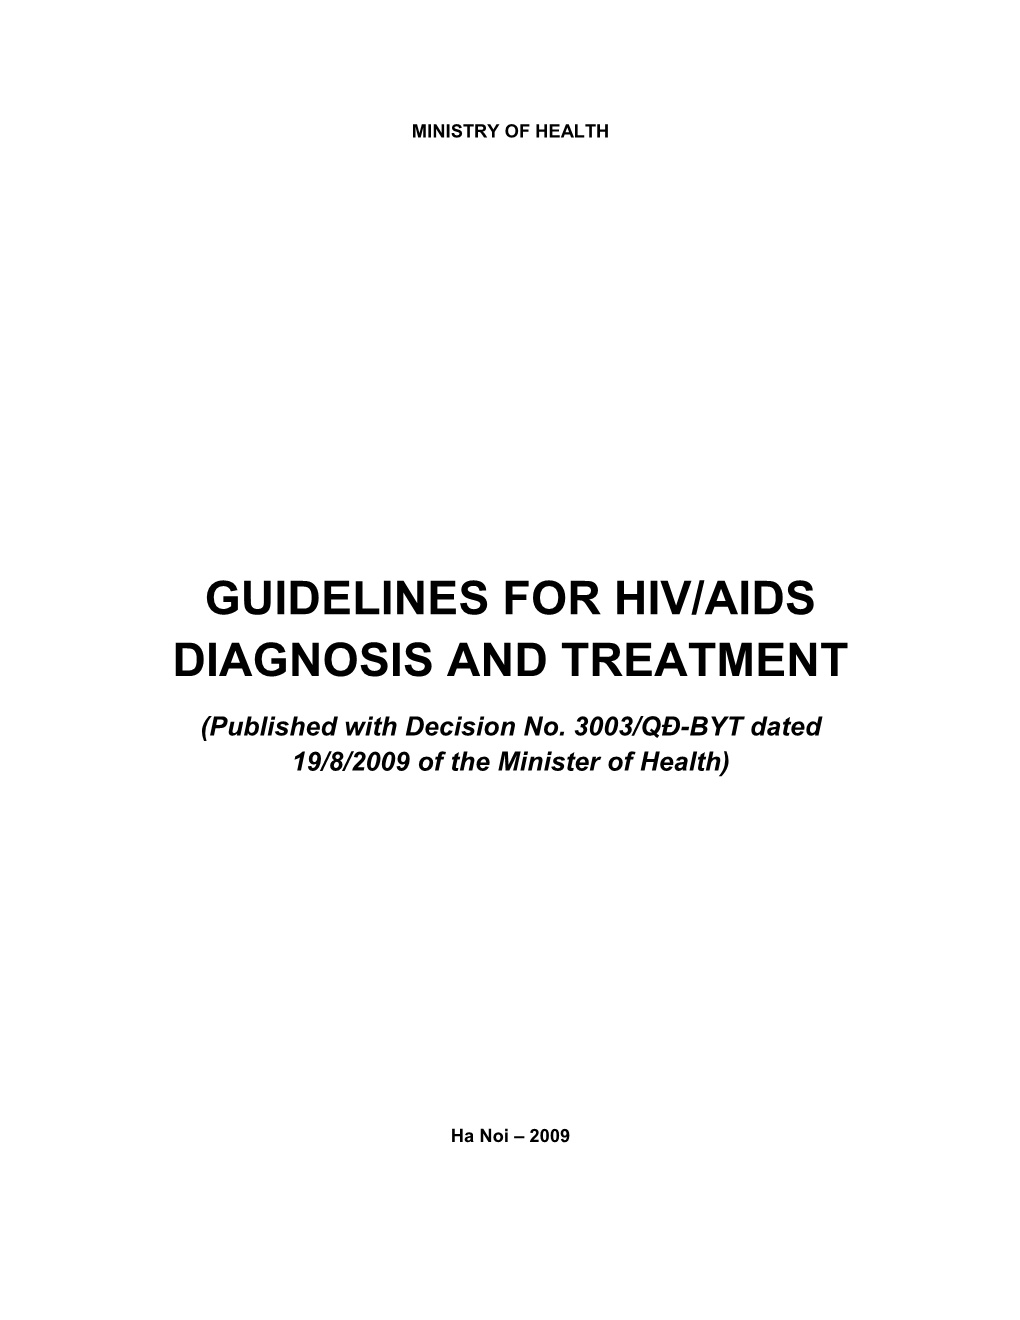 Guidelines for Hiv/Aids Diagnosis and Treatment